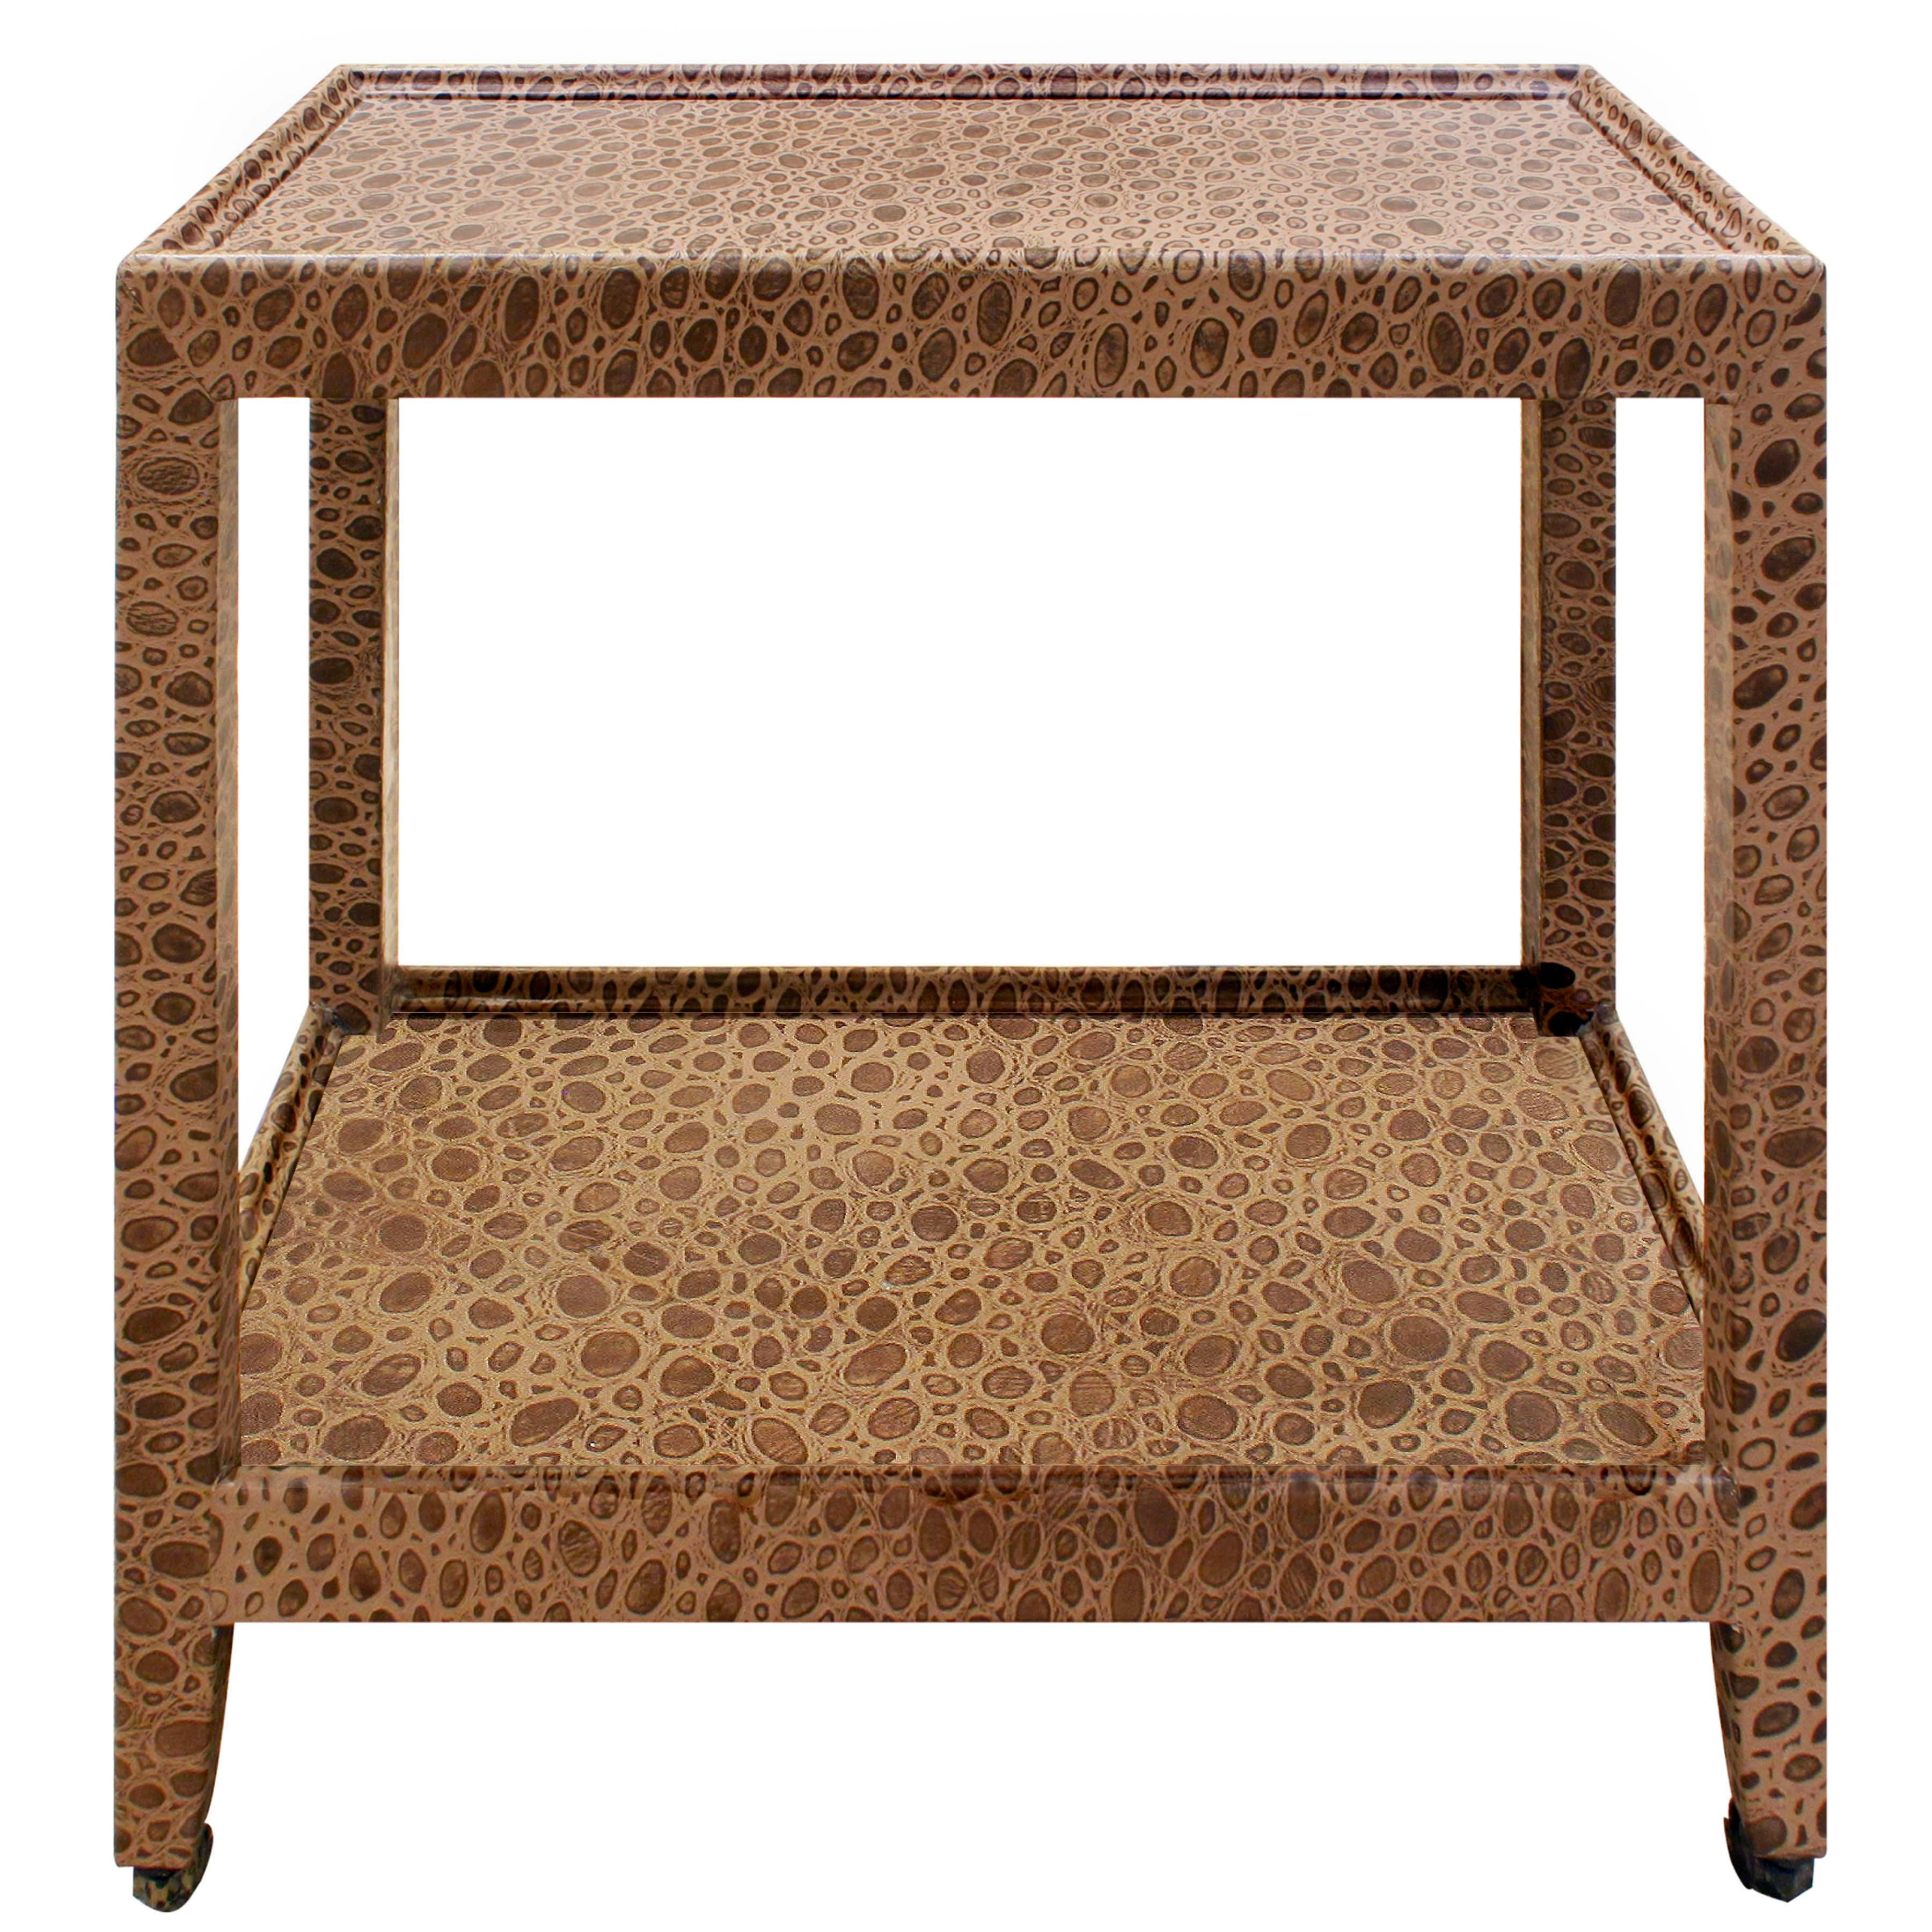 Karl Springer Furniture – 372 For Sale At 1stdibs Pertaining To Era Glass Console Tables (View 24 of 30)